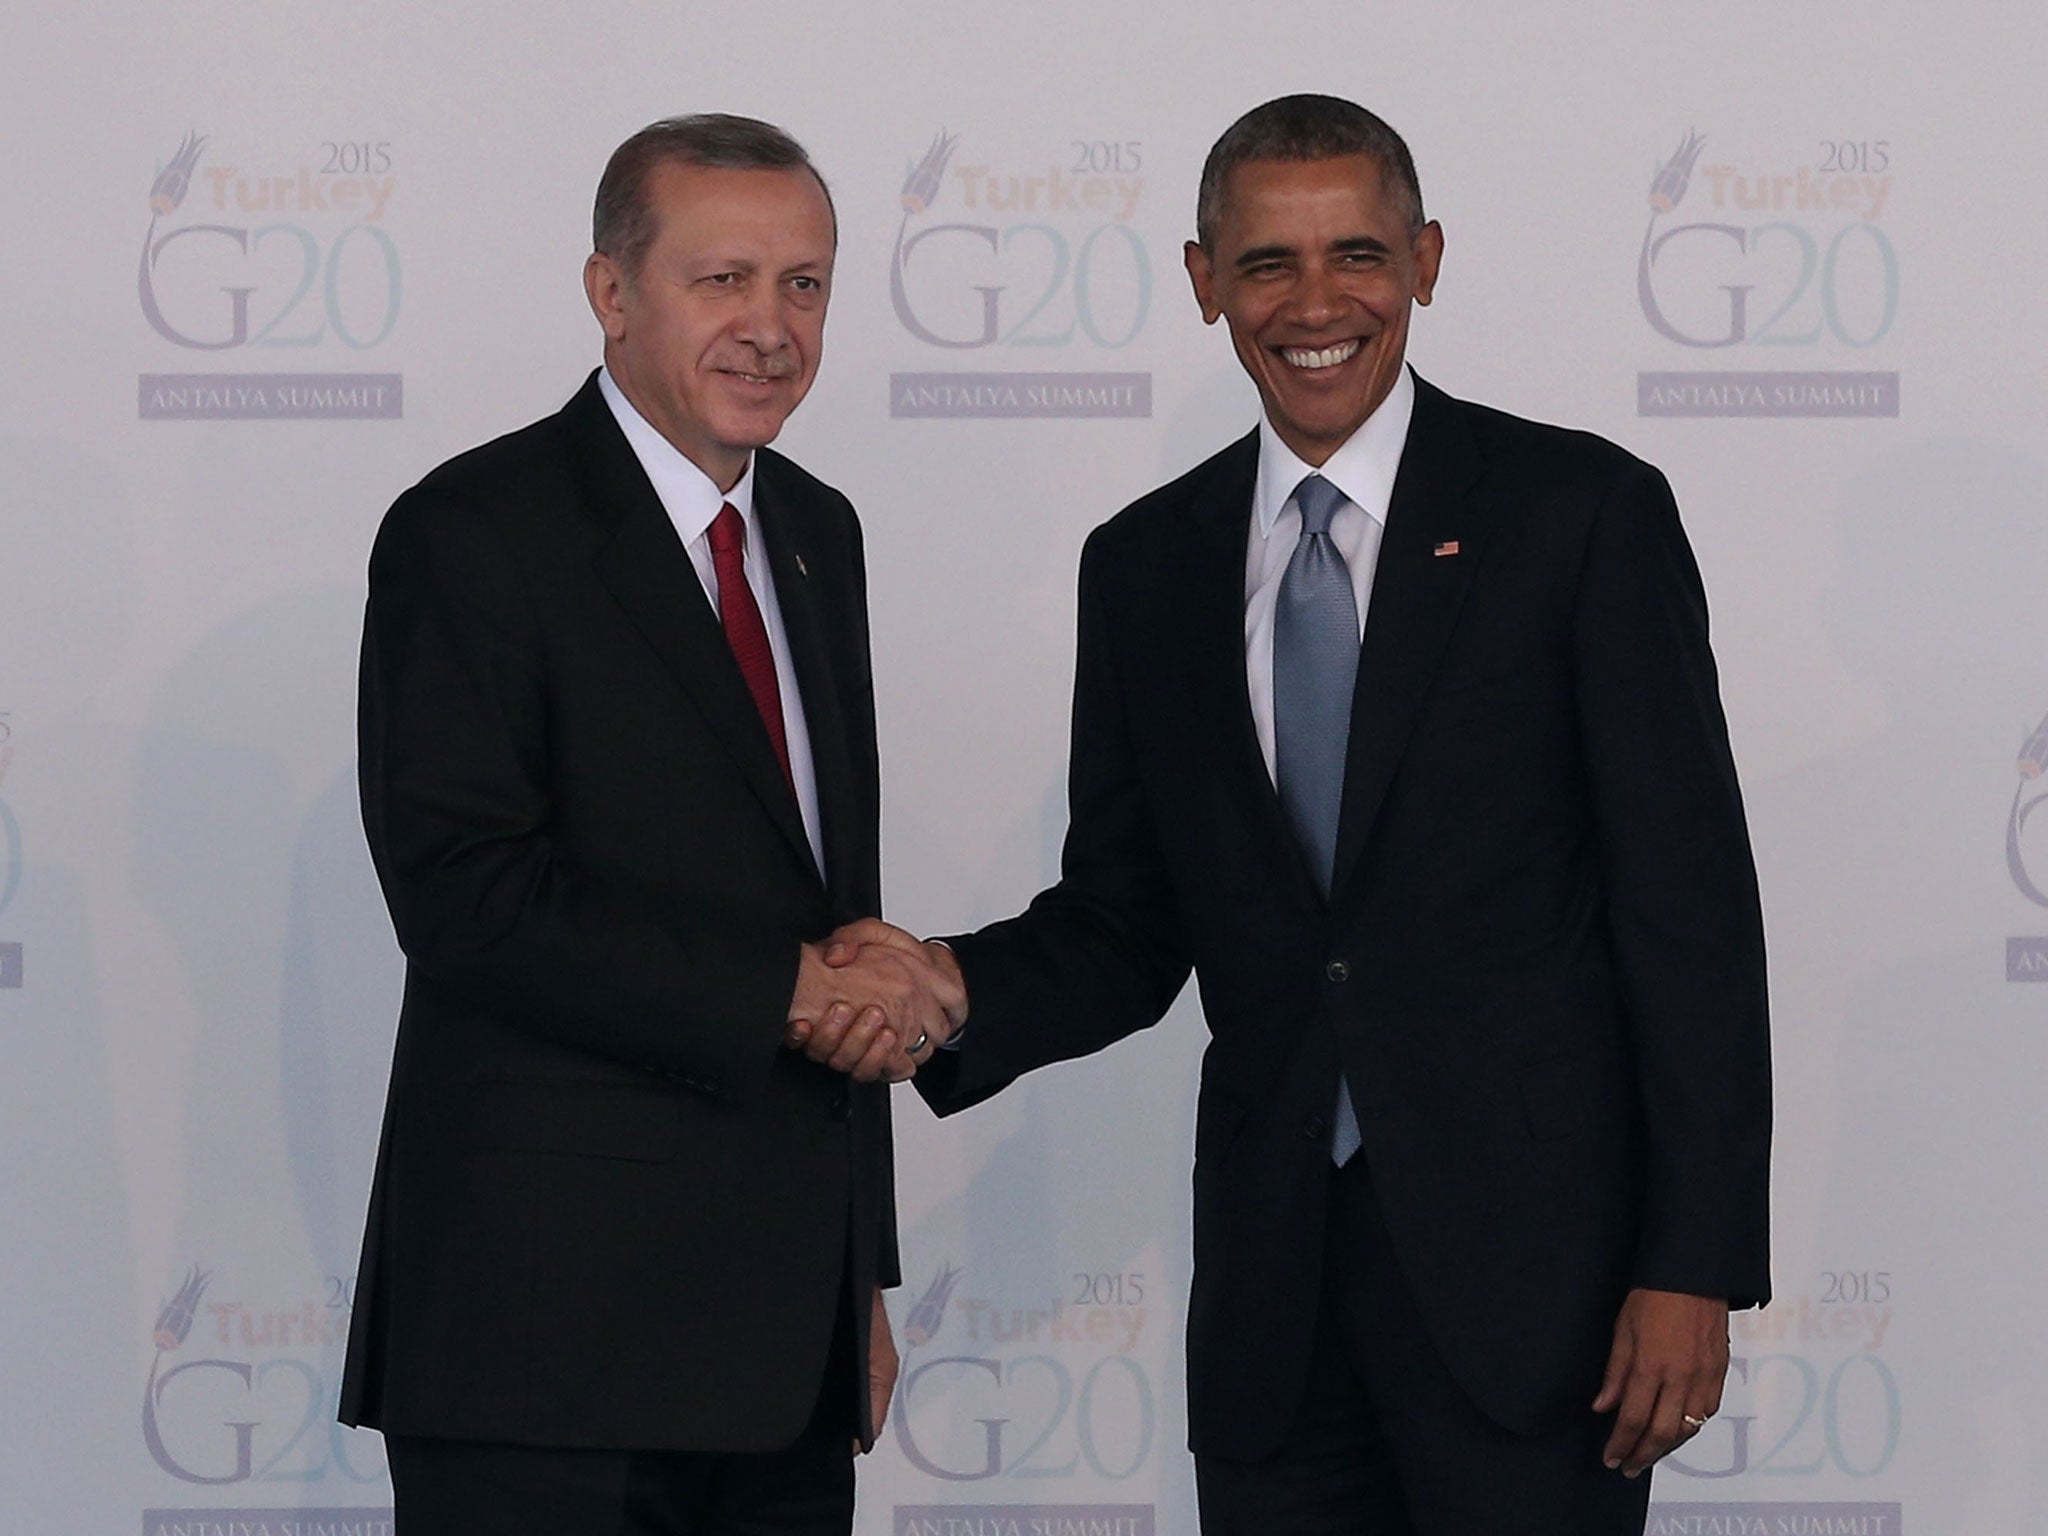 Mr Obama said he was 'troubled' by the media clampdown in Turkey